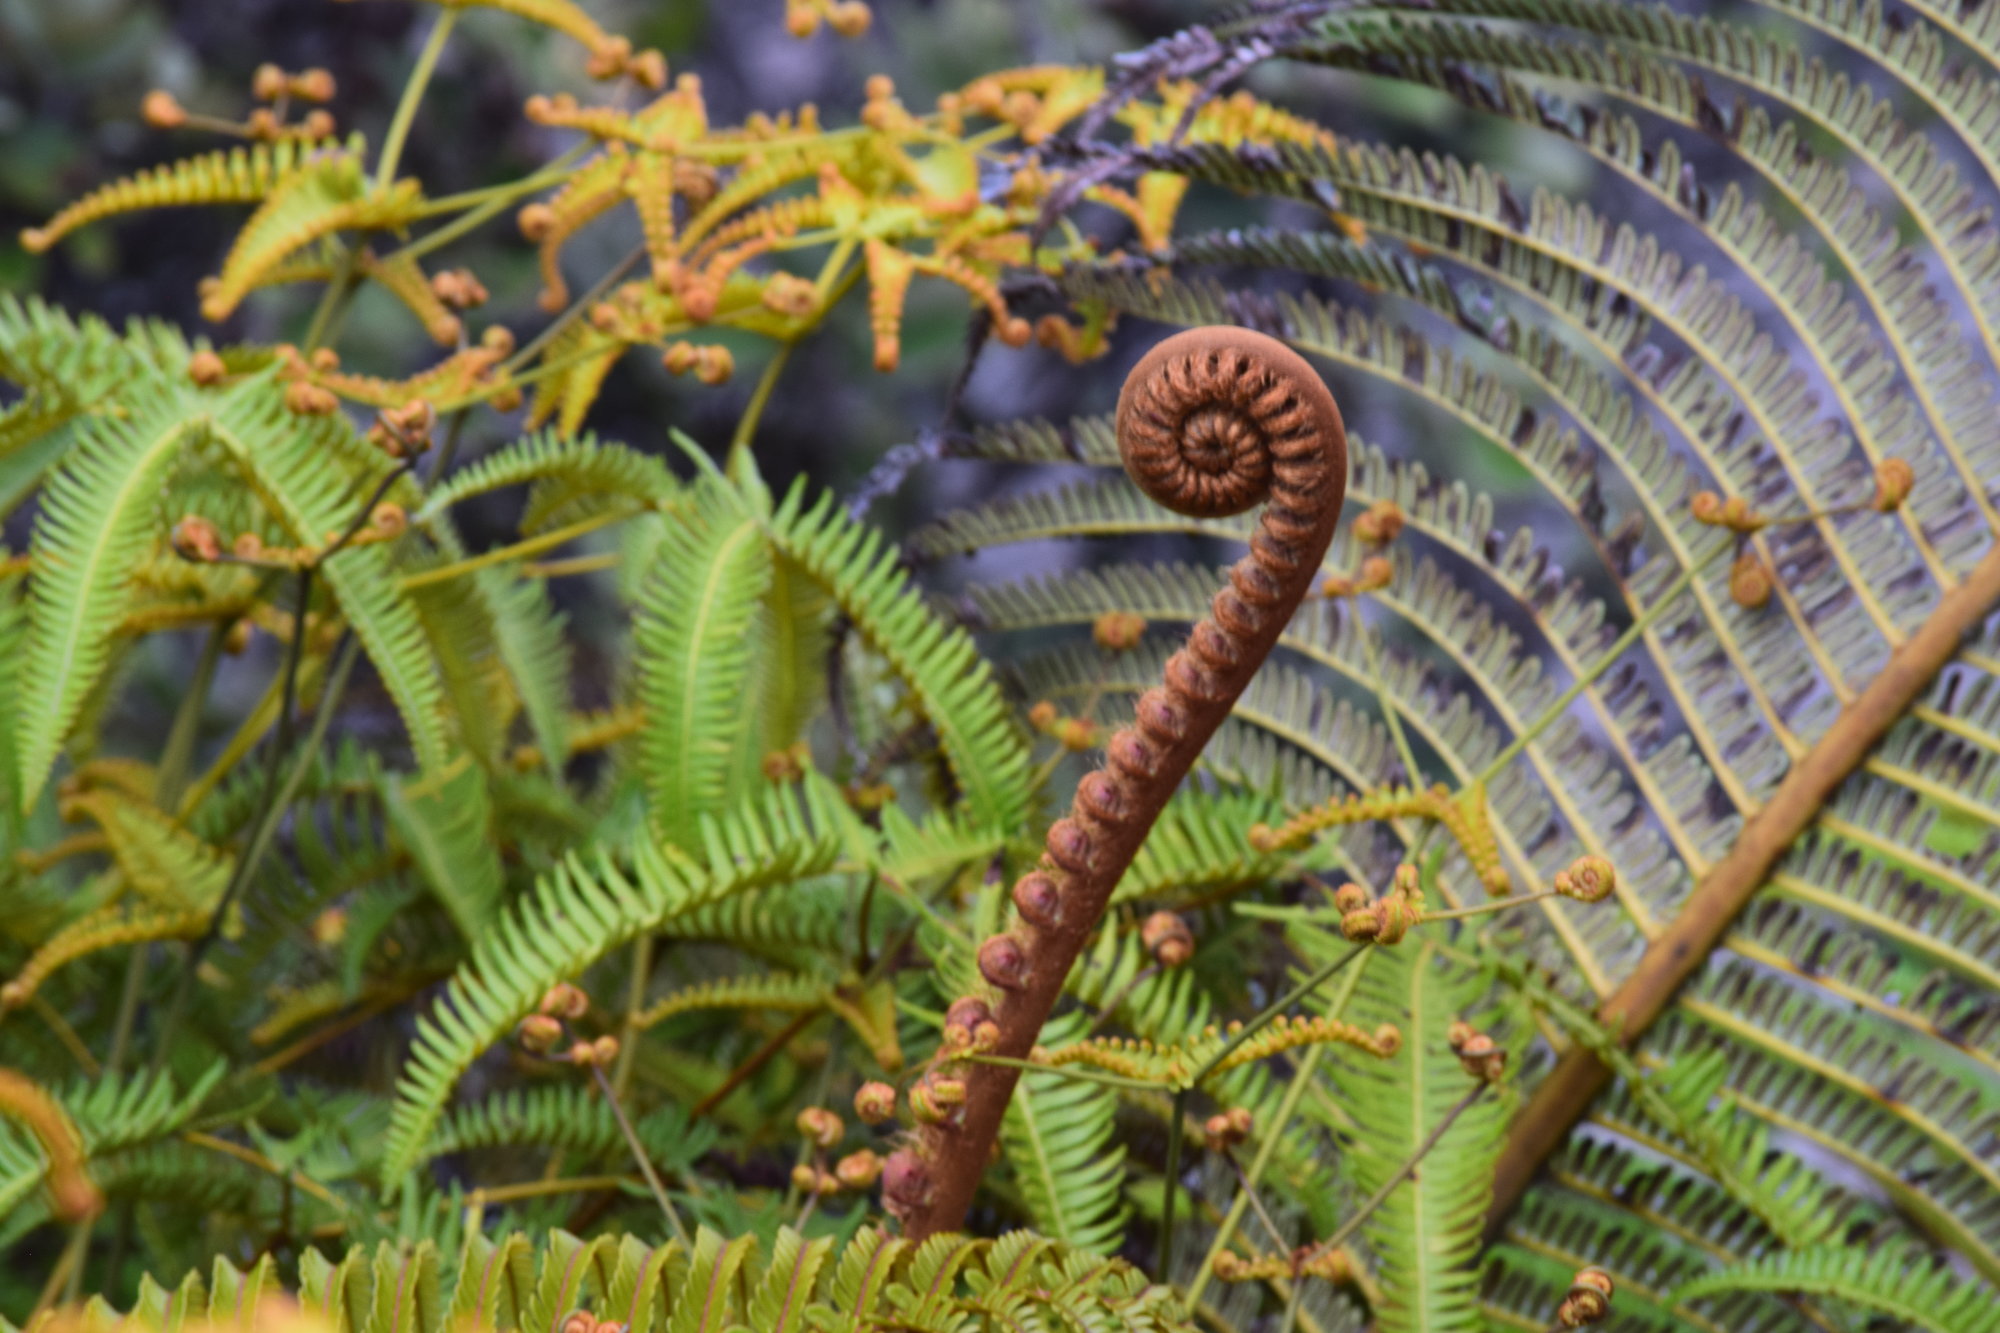 Curly fern at Volcano